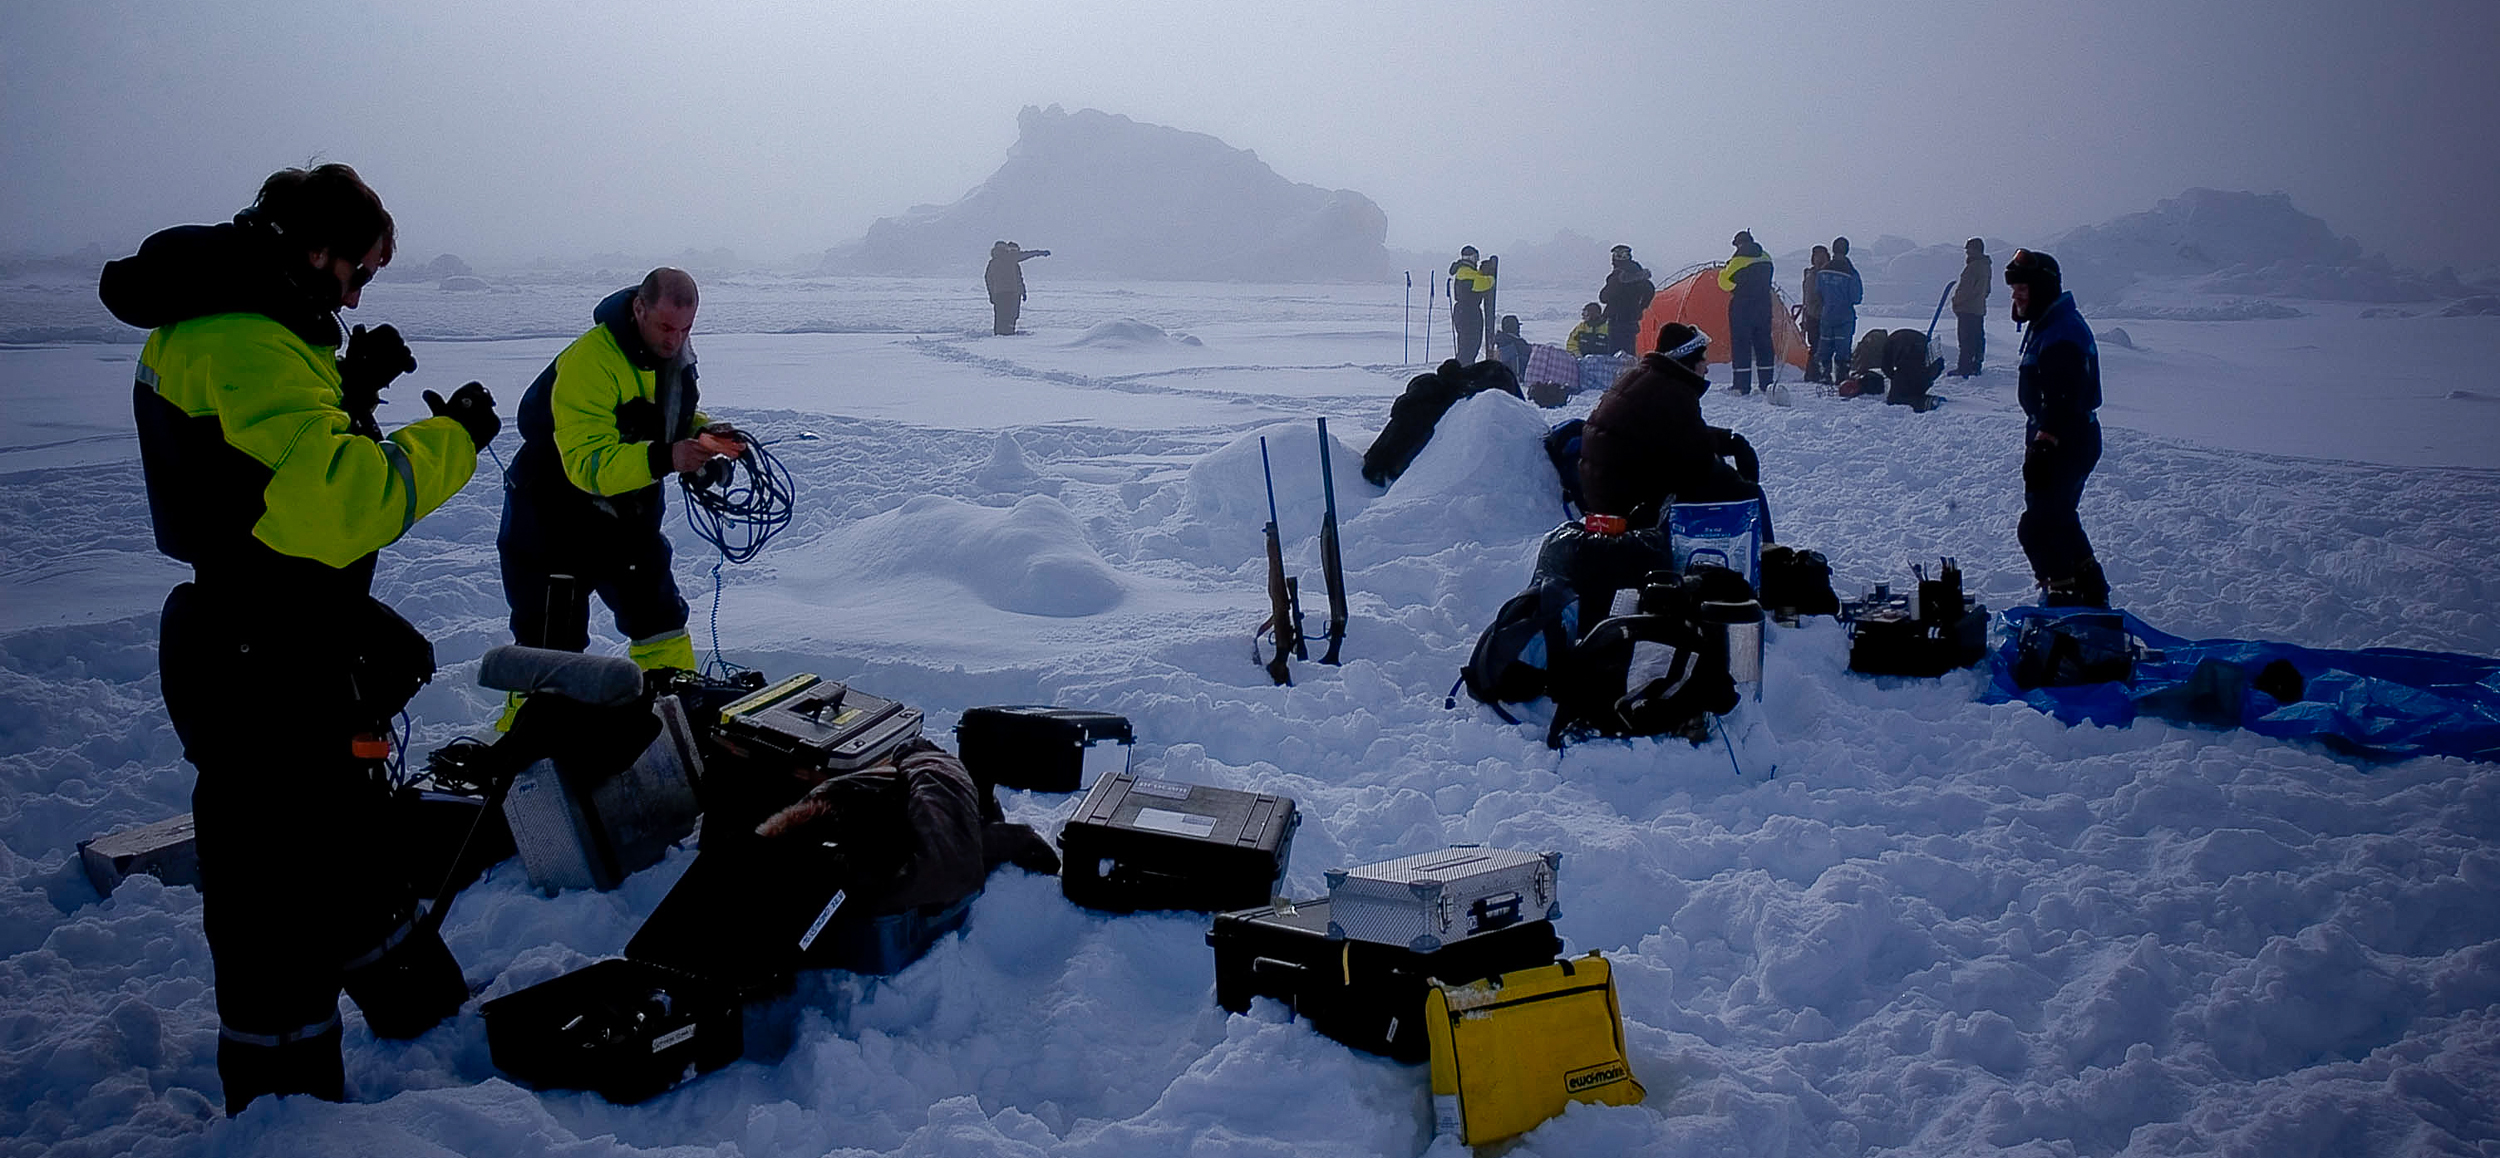 For a film crew to stay creative, focused and unafraid on arctic locations requires them feeling safe.  And safety requires local knowledge. JONAA©Kristjan Fridriksson